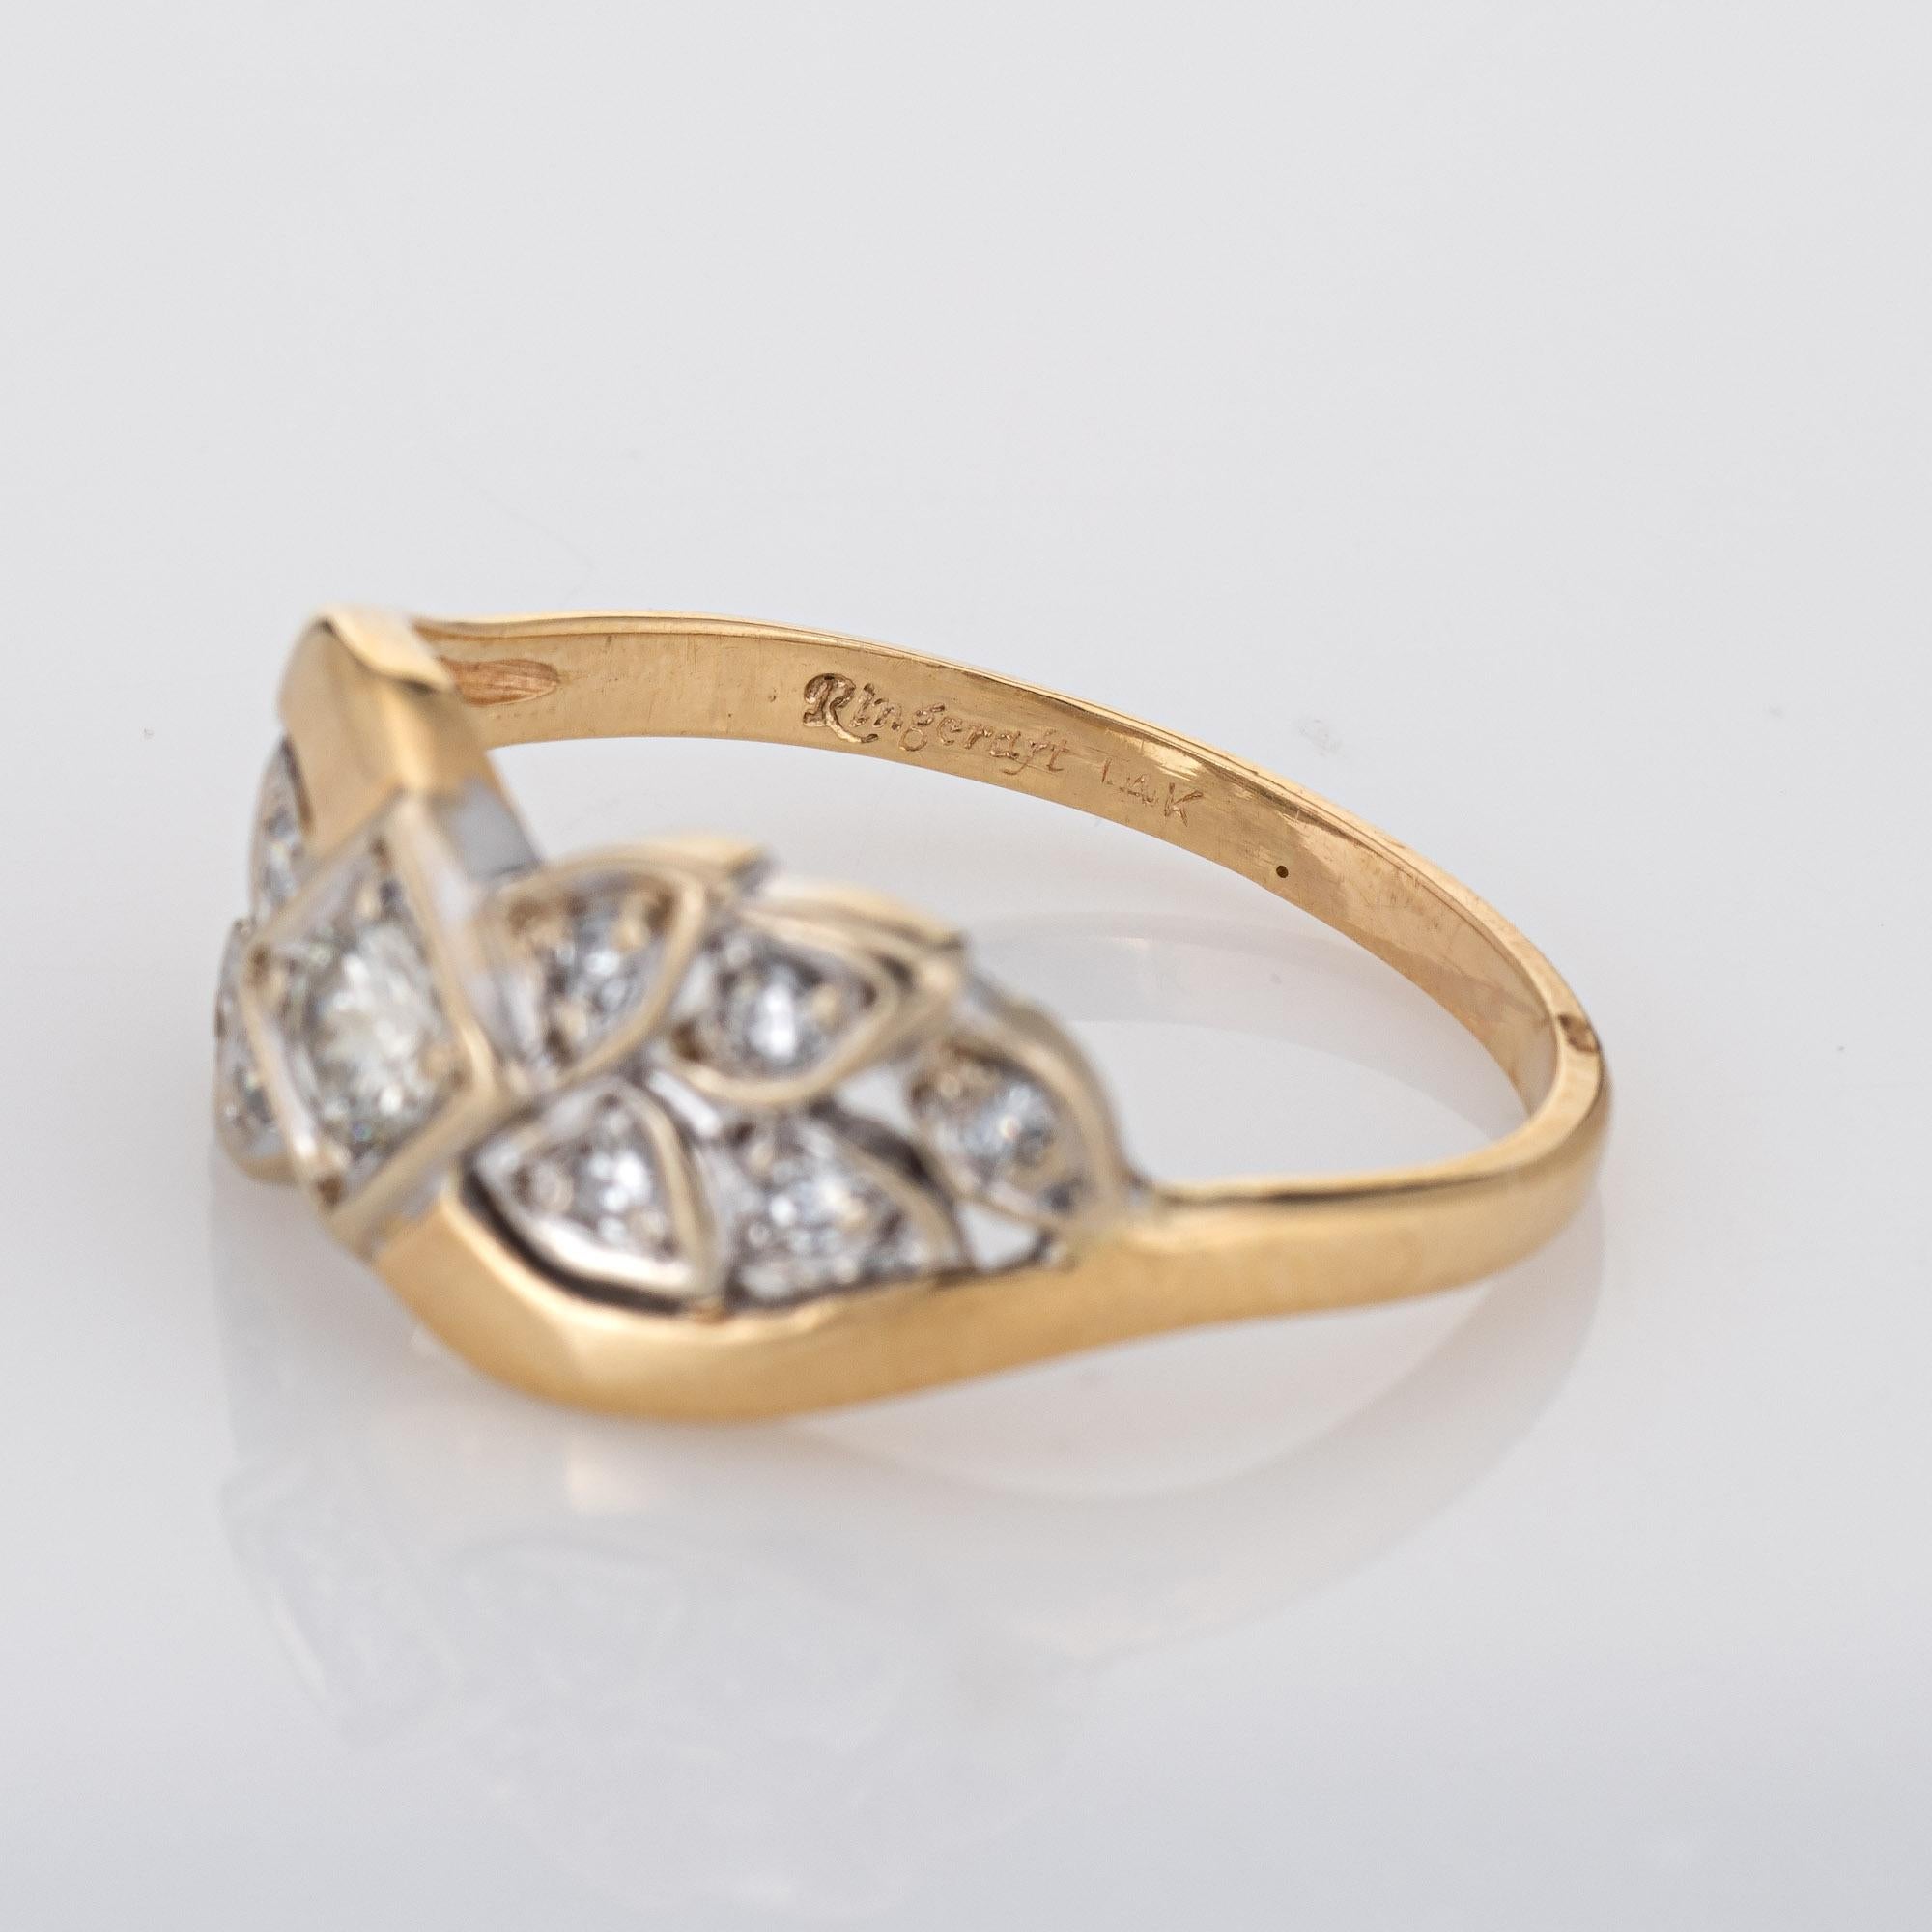 Vintage Diamond Wreath Band 14k Yellow Gold Wedding Ring Estate Jewelry In Good Condition For Sale In Torrance, CA